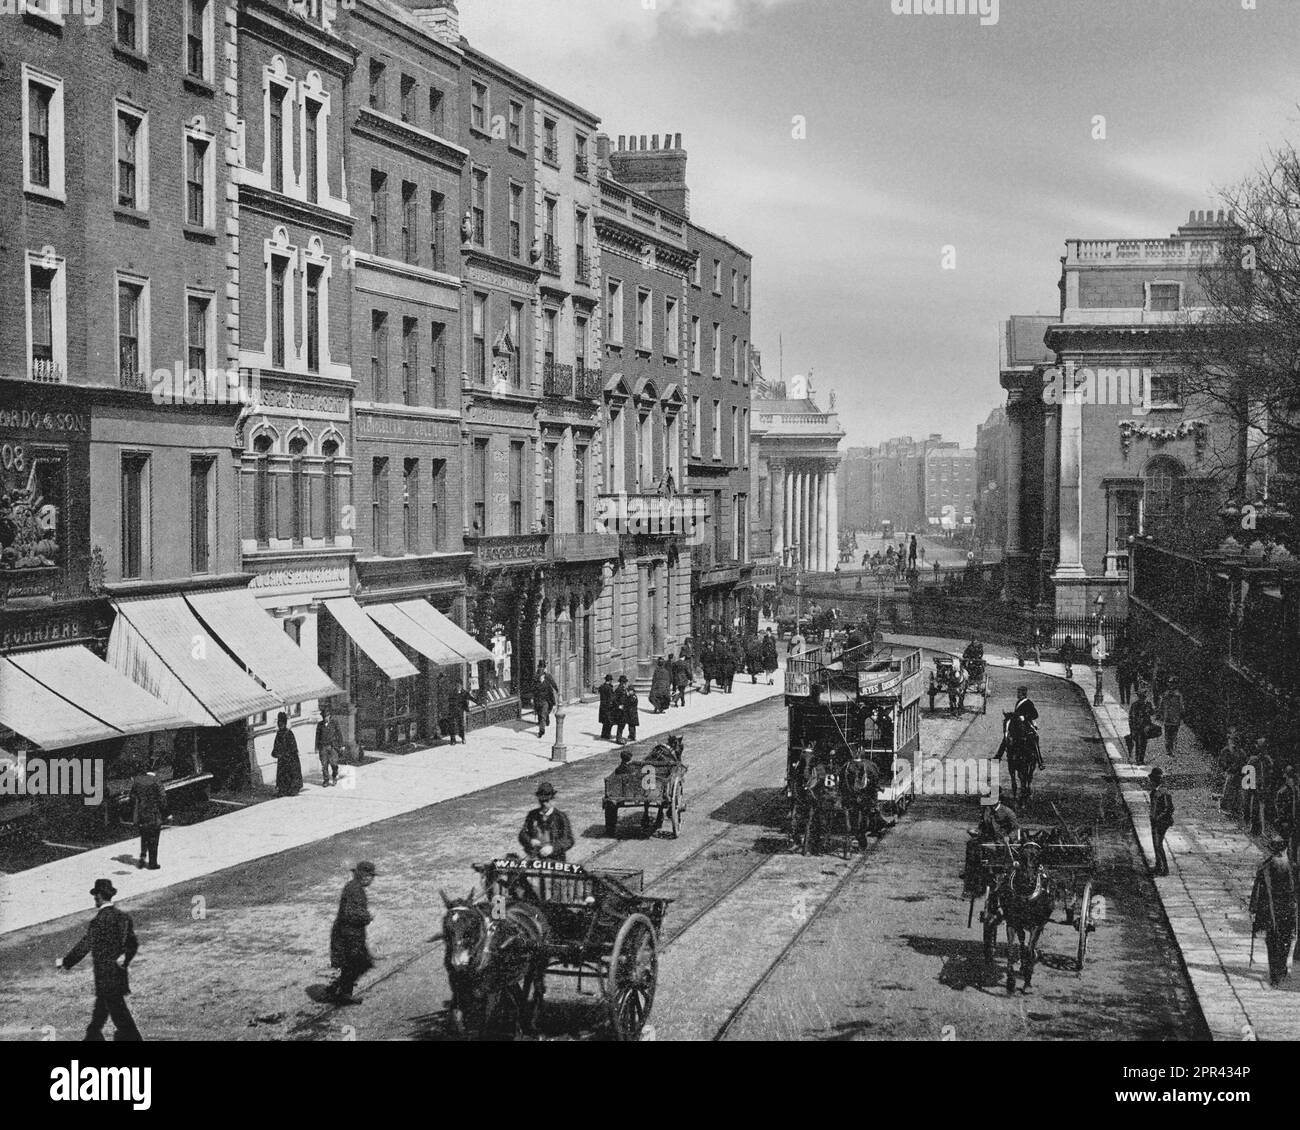 A late 19th century photograph of Grafton Street, Dublin city centre, Ireland at the College Green end,originally a fashionable residential street with some commercial activity. It became increasingly dilapidated  by 1849, then during the late 19th century, a number of retail properties were built and several long standing businesses established their presence on the street, such as the department stores Switzer's and Brown Thomas. The jewellers Weirs opened in 1869.  During the 20th century, it became known for the coffee house Bewley's, mid- and up-market shopping, and as a popular spot for Stock Photo